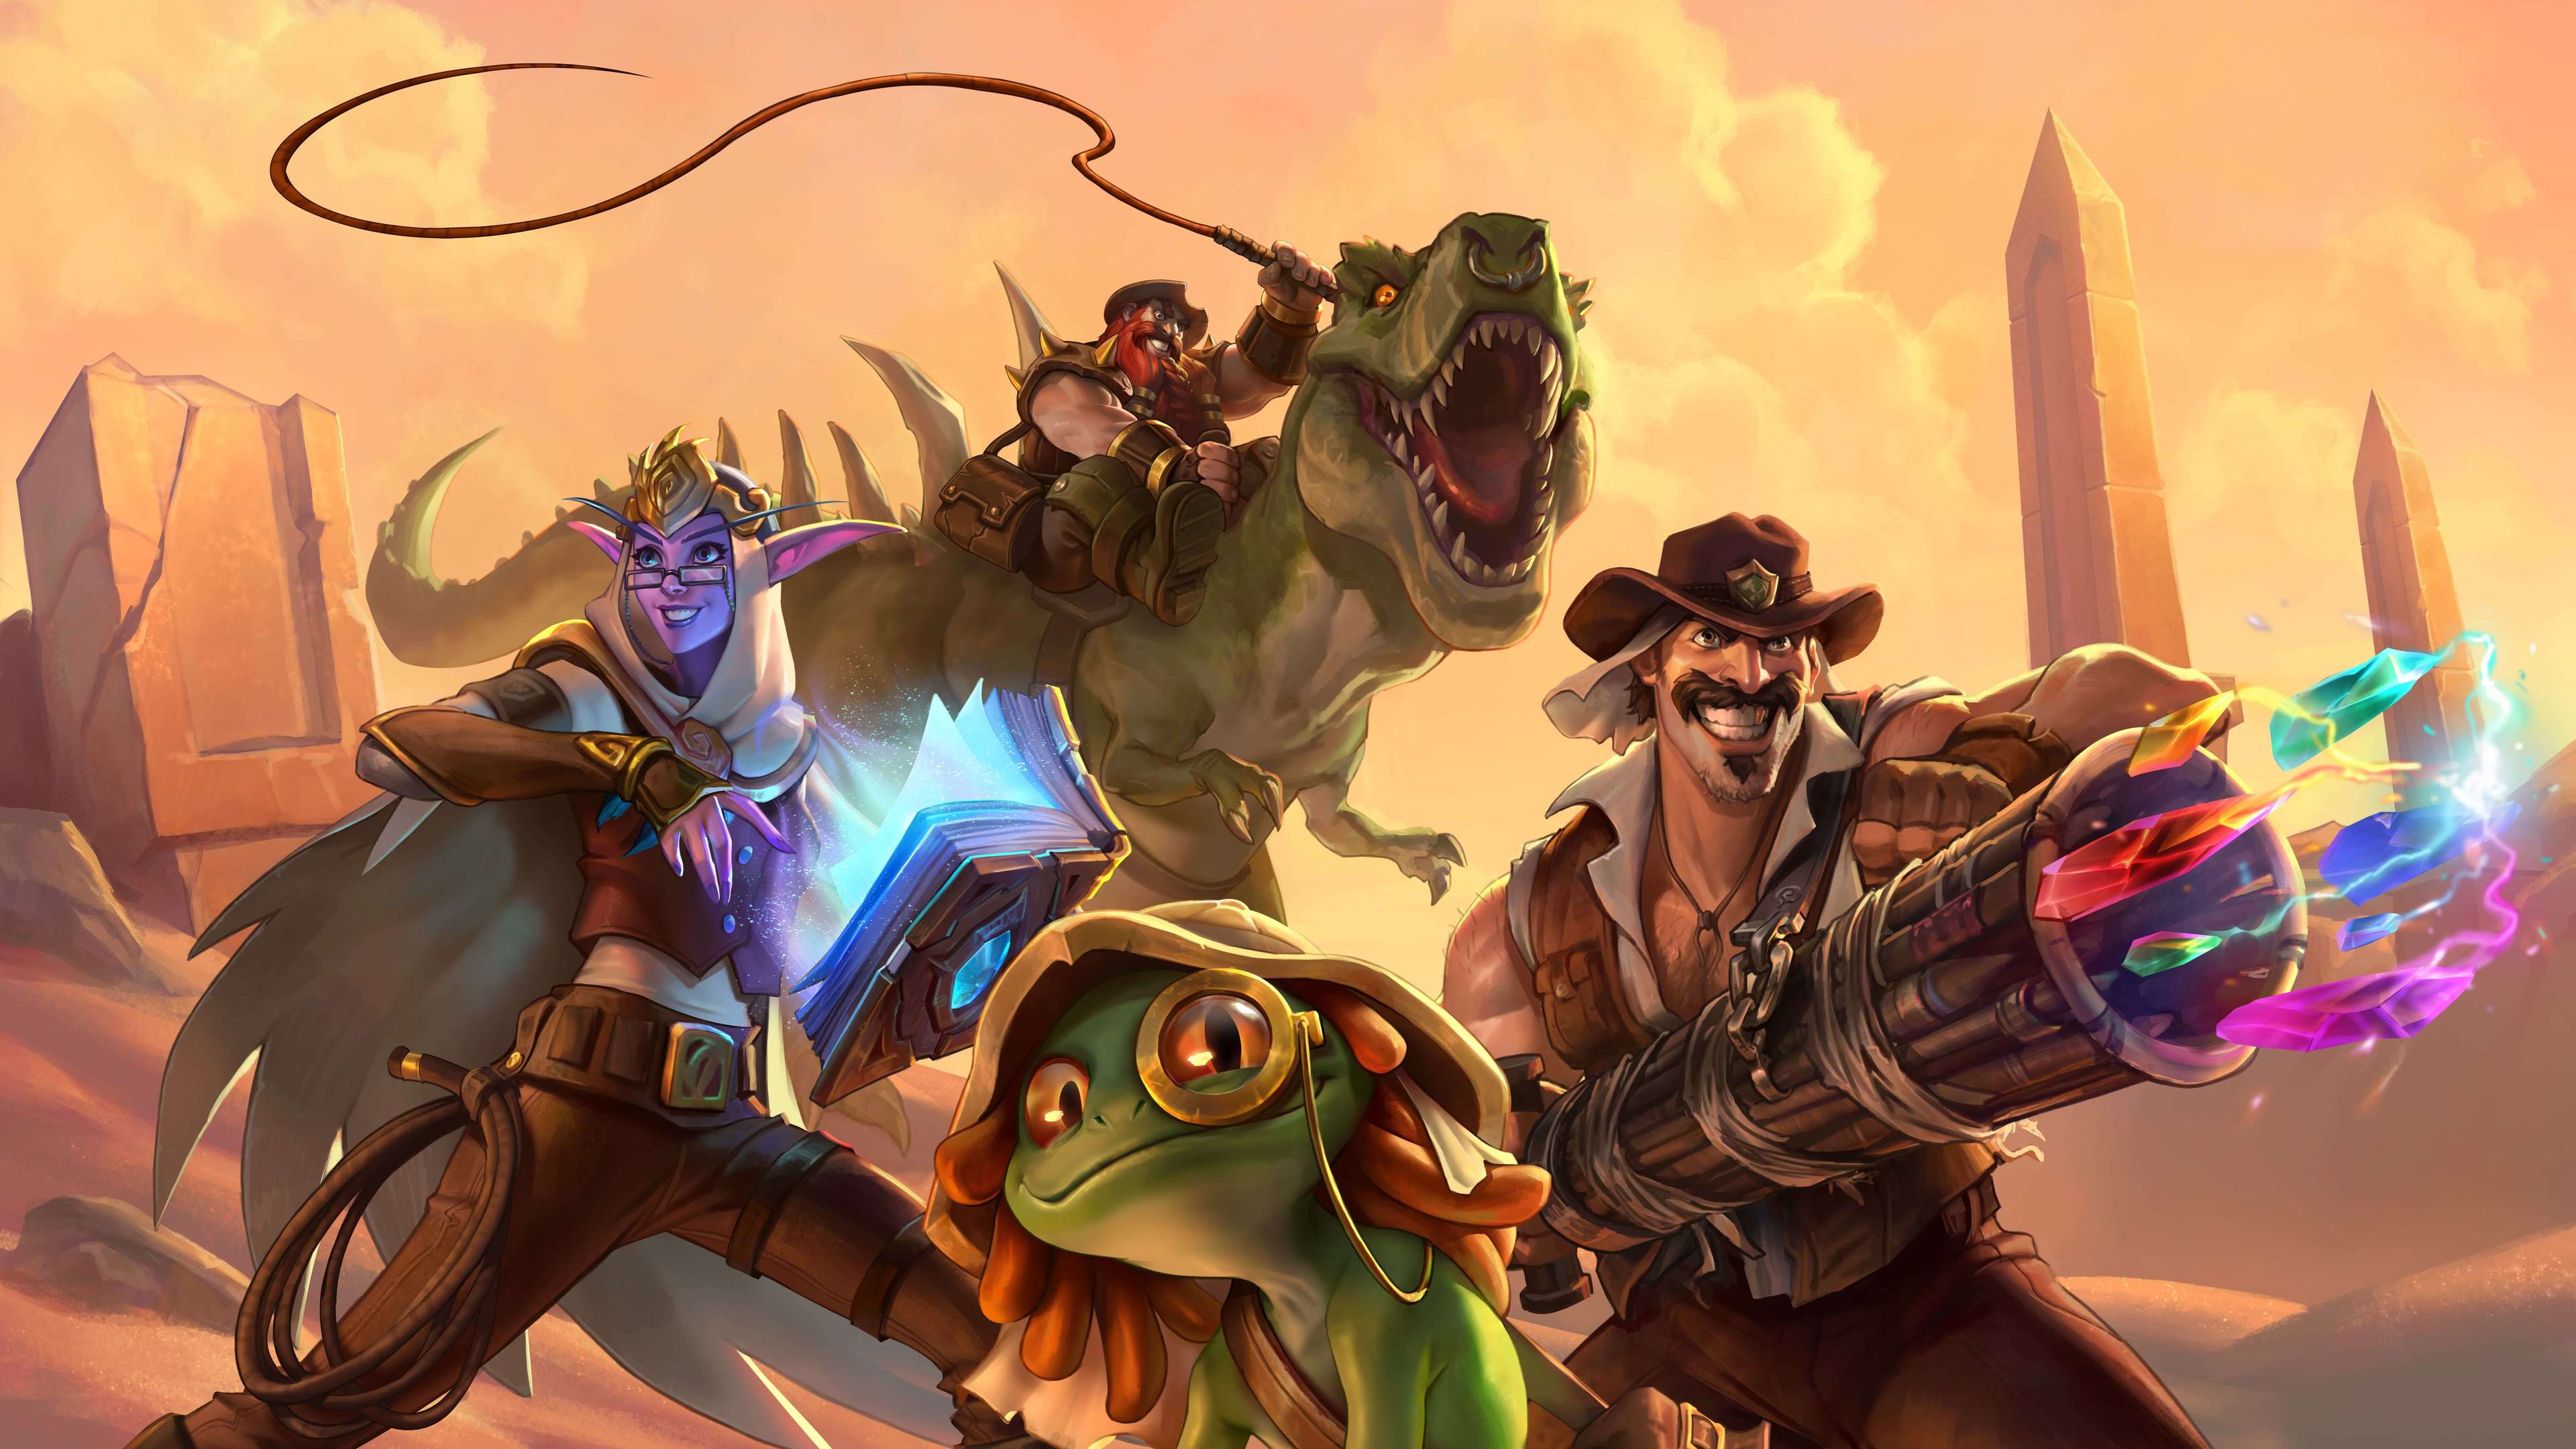 Desktop Wallpaper Hearthstone Heroes Of Warcraft Video Game Hd Image  Picture Background 98217b